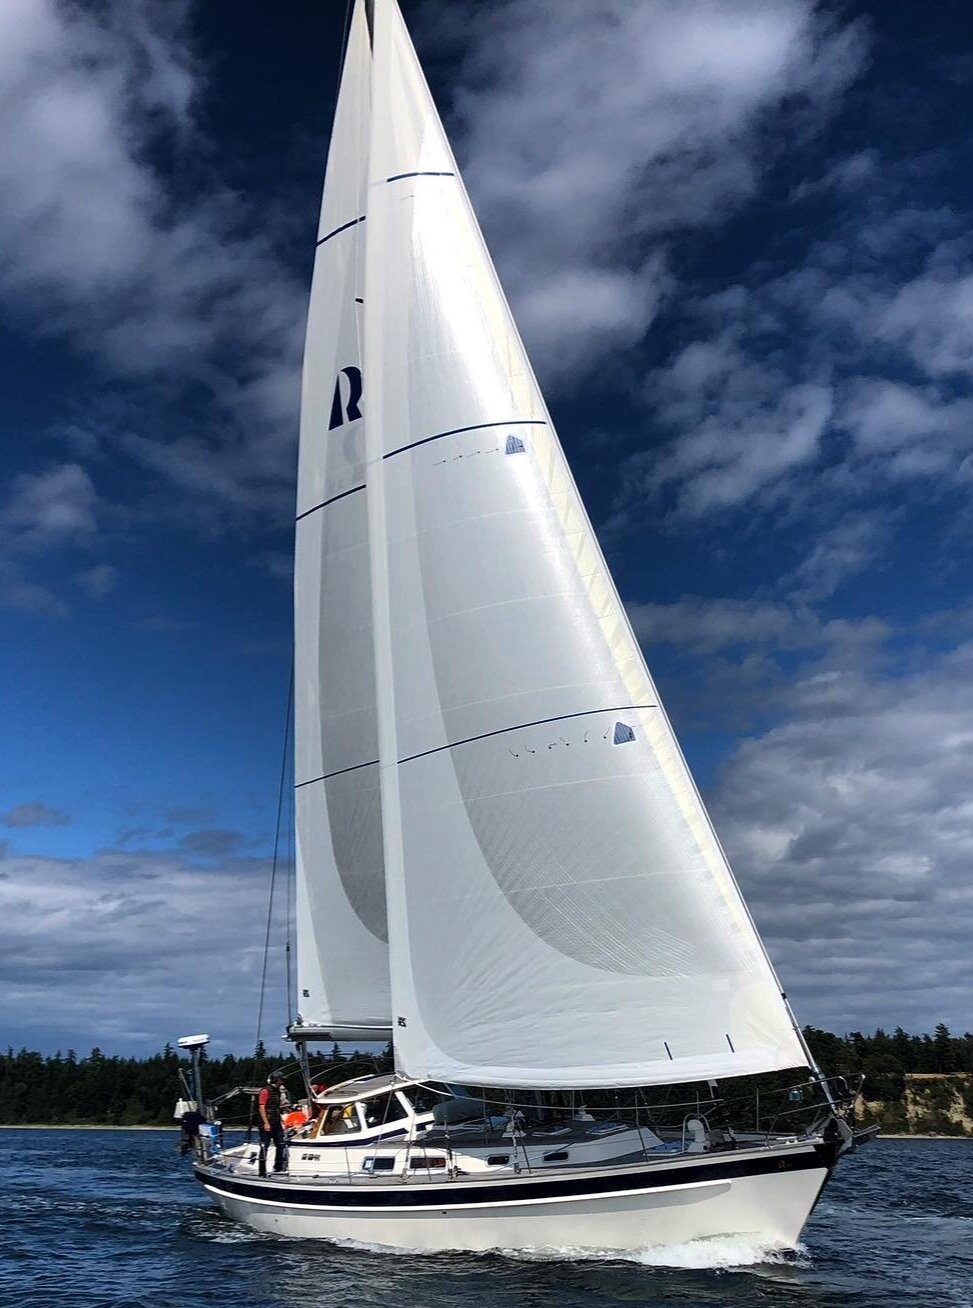 Hallberg Rassy 53 with X-Drive Endure sails where one full side of the sail covered with taffeta and the second side has a partial layer of taffeta on the foot and leech of both the main and genoa.